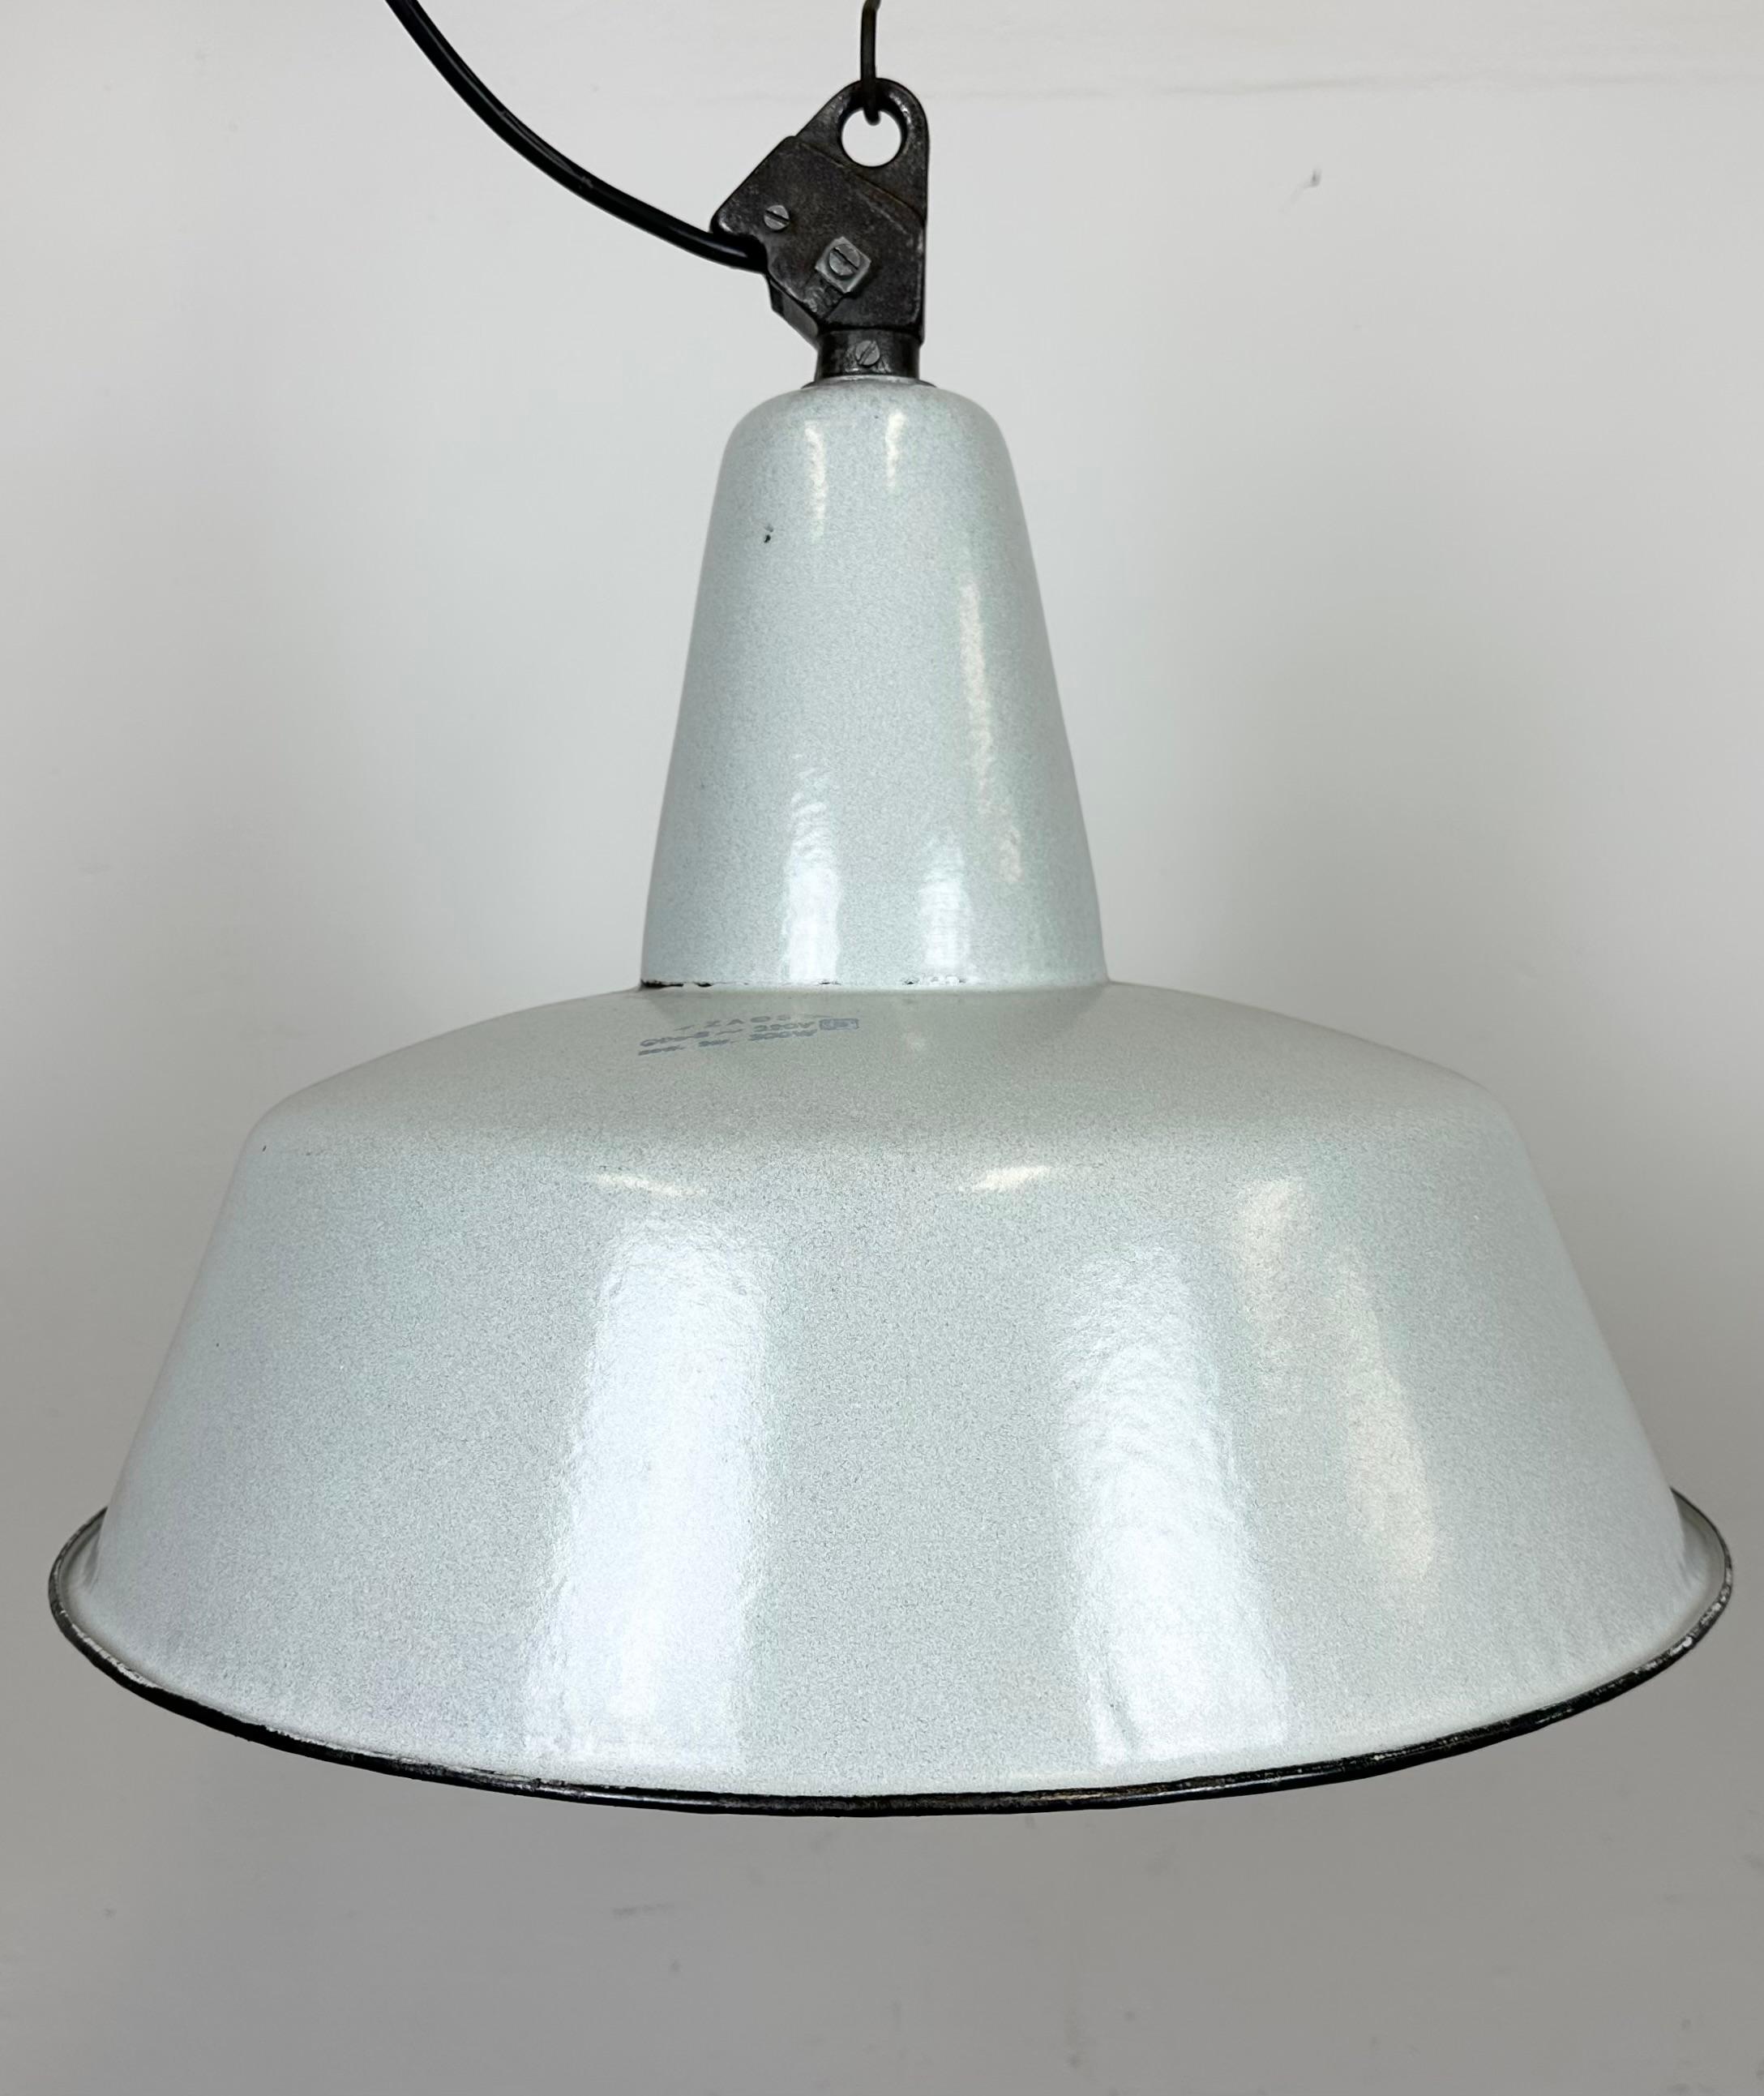 Polish Large Industrial Grey Enamel Factory Pendant Lamp from Zaos, 1960s For Sale